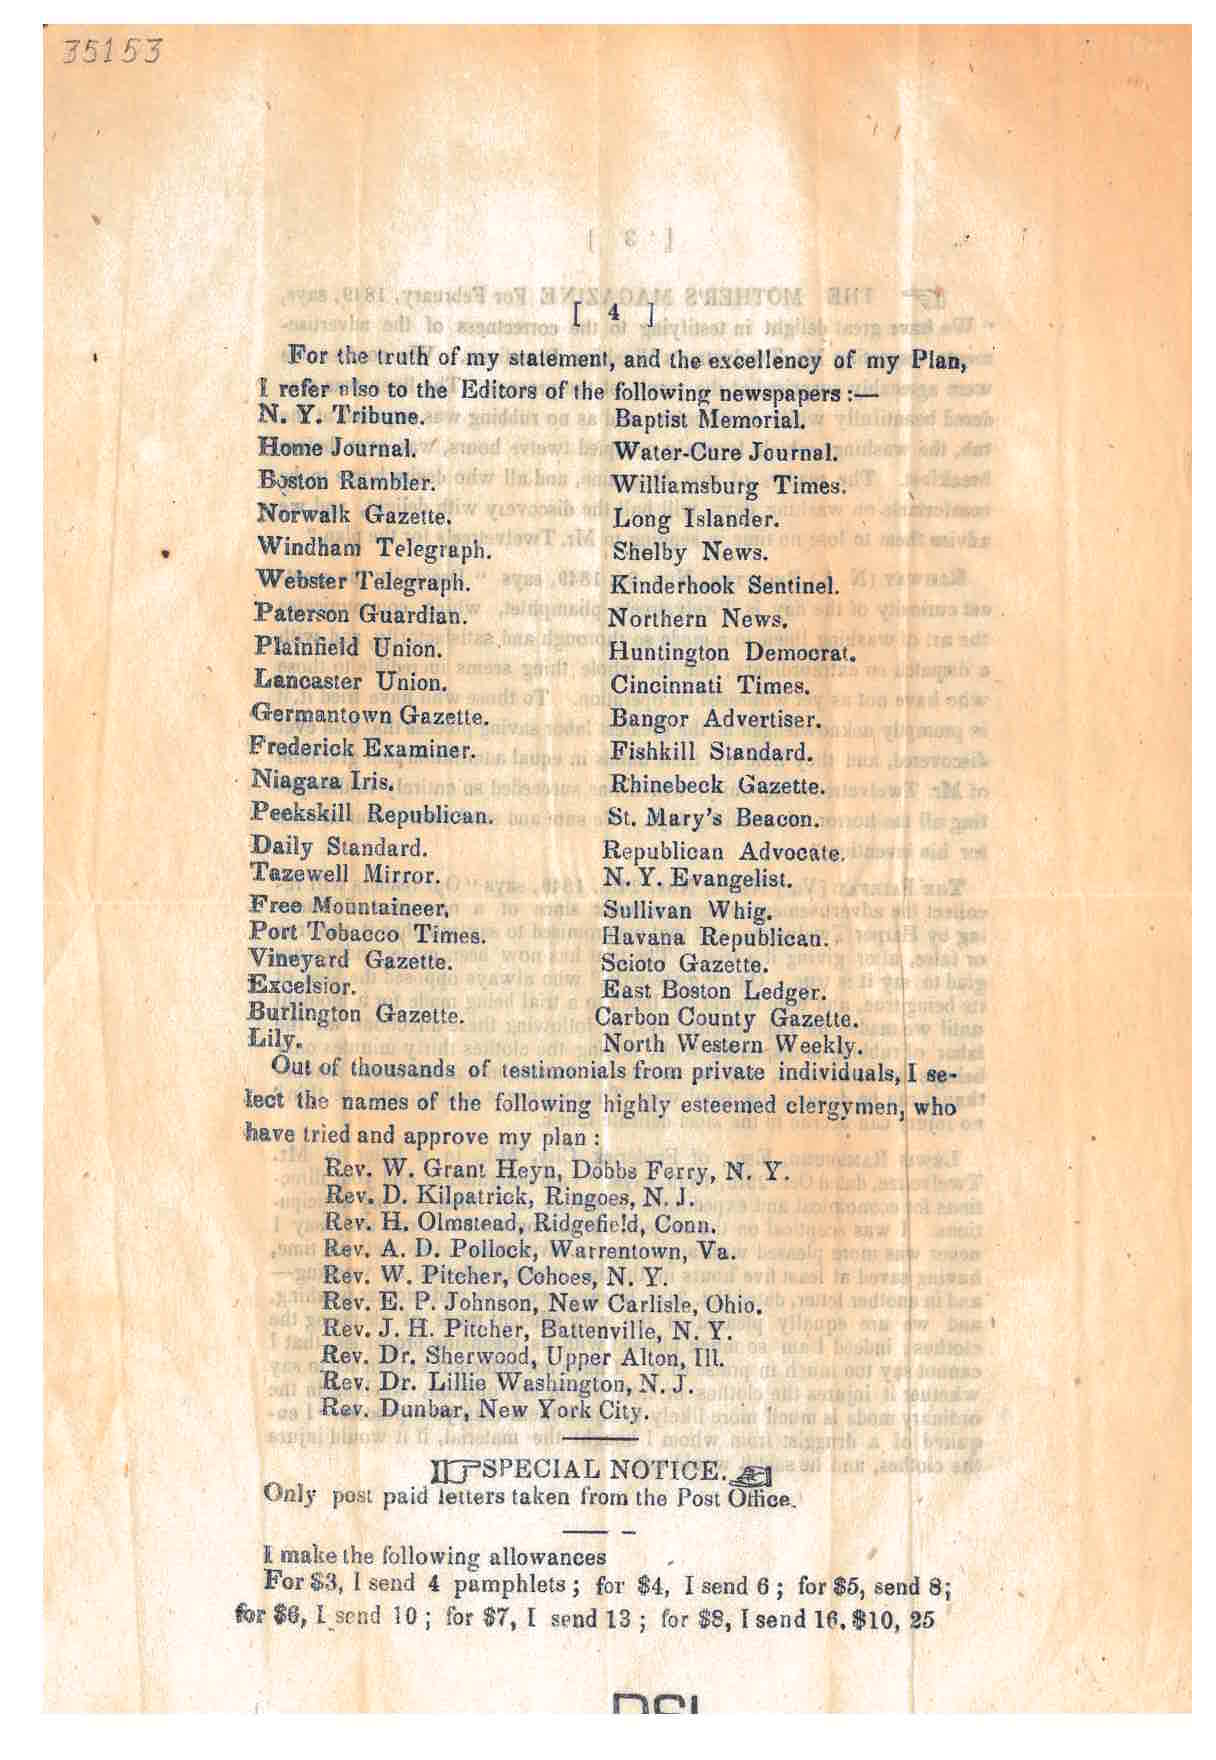 list of references including newspaper editors and clergymen